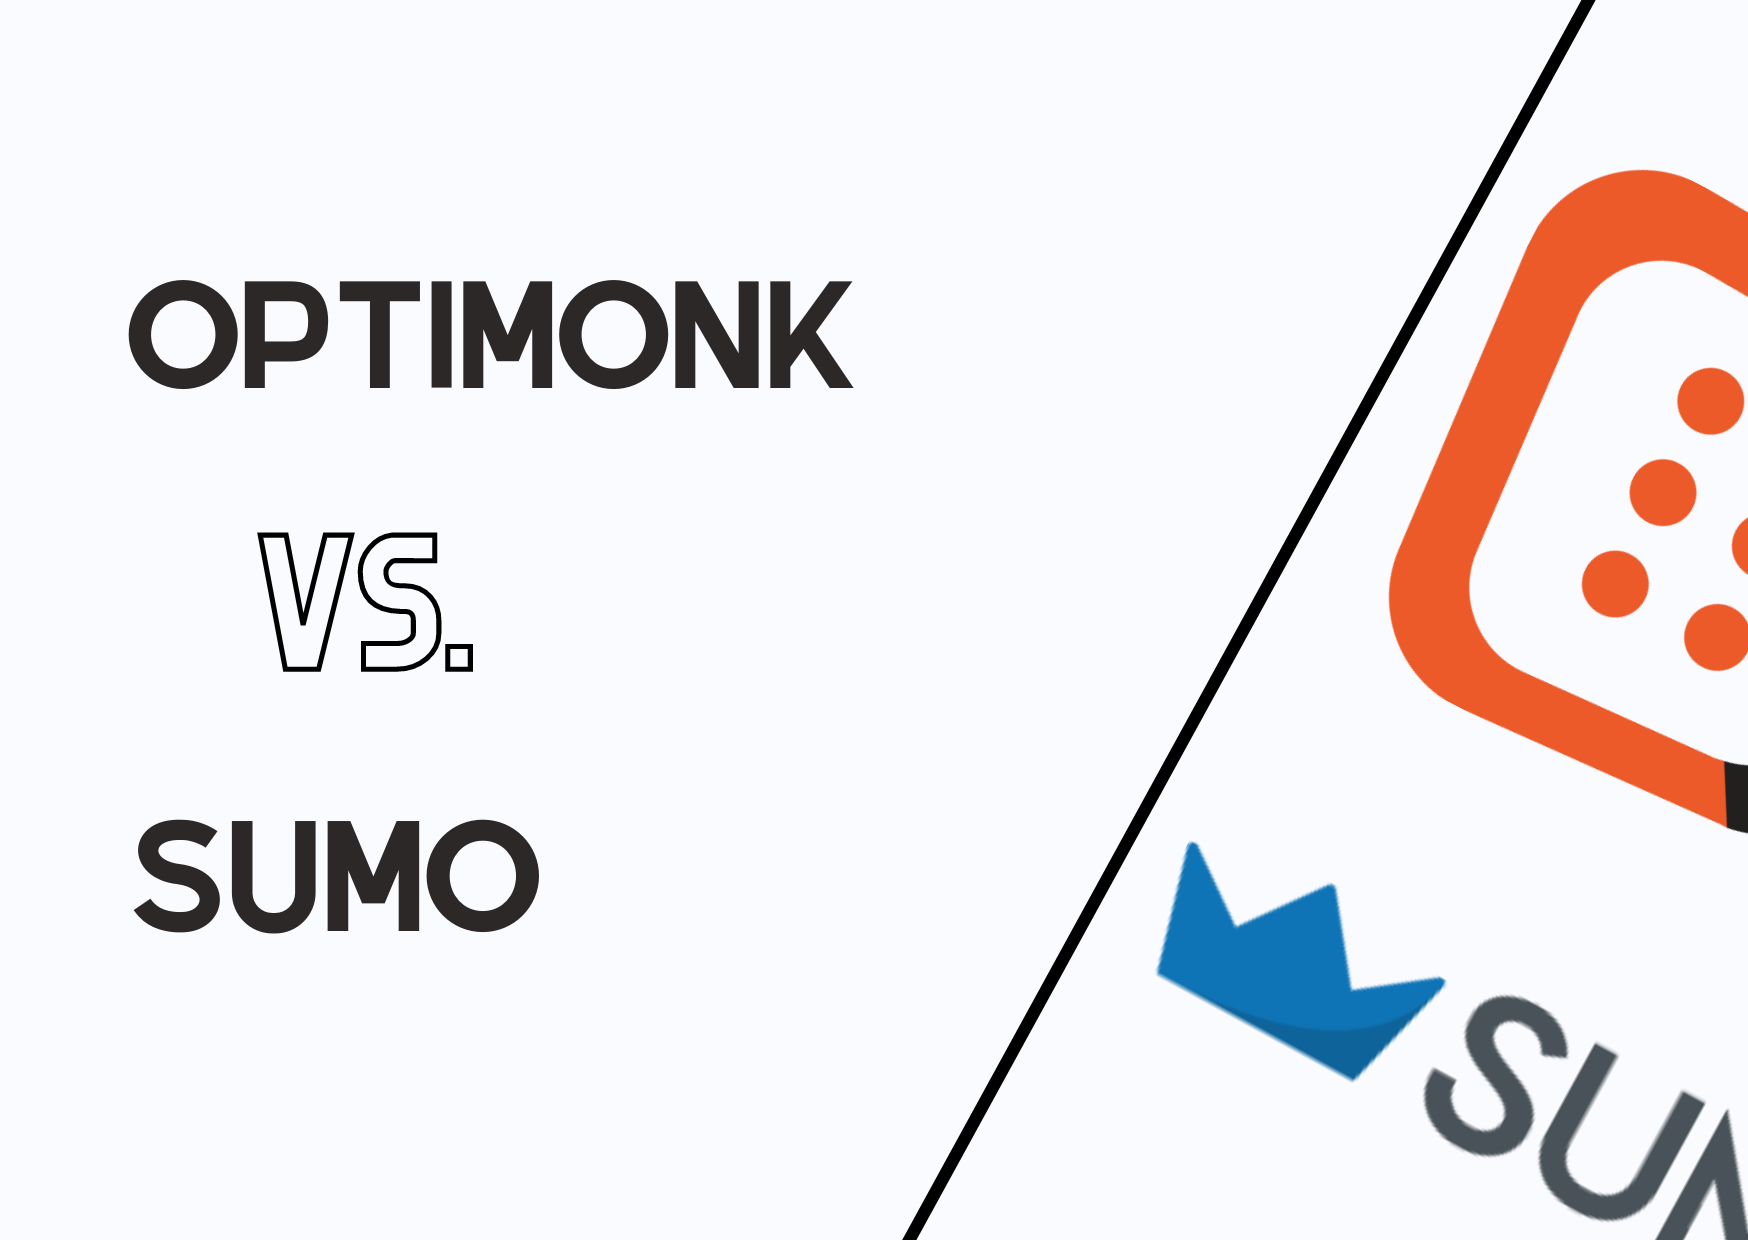 OptiMonk and Sumo comparison banner in terms of similarities and differences